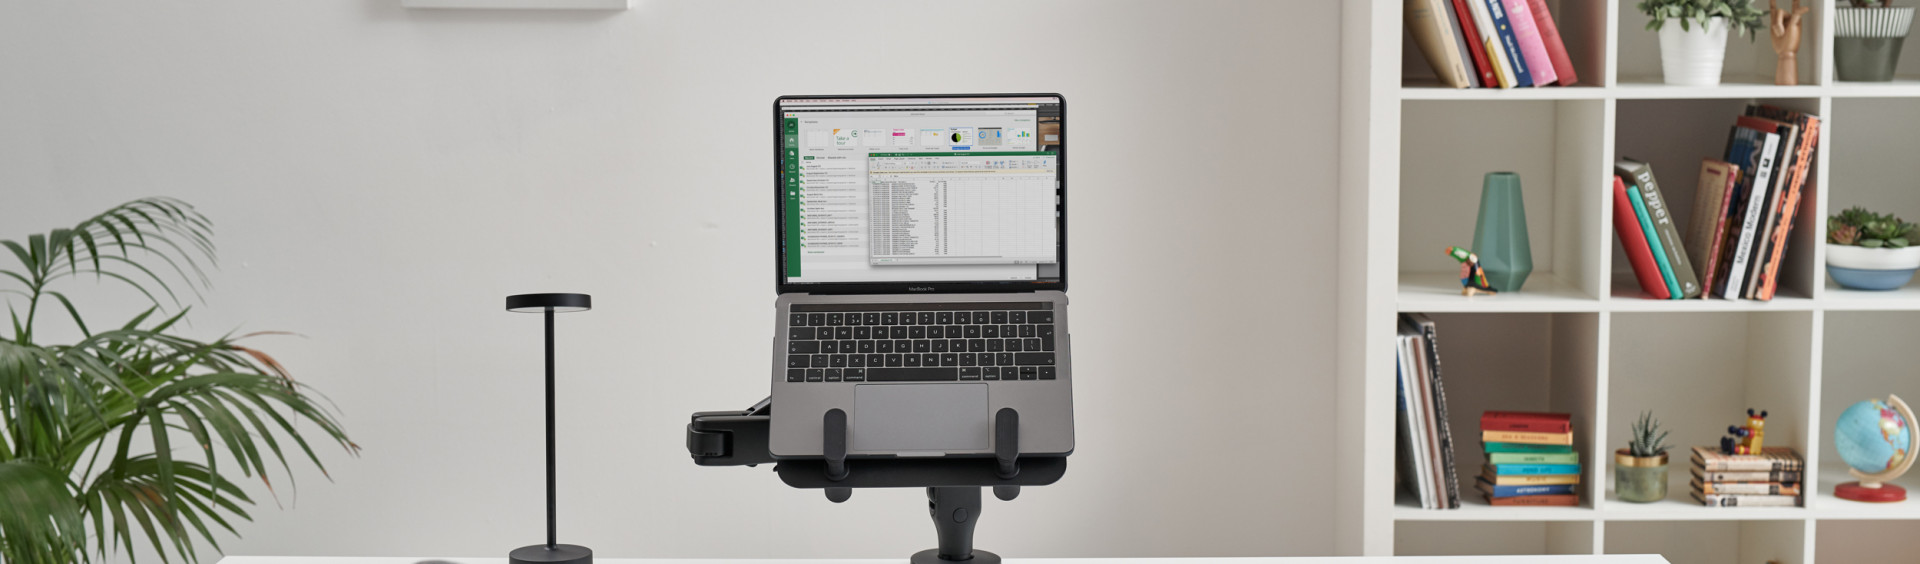 Laptop and Tablet Mount